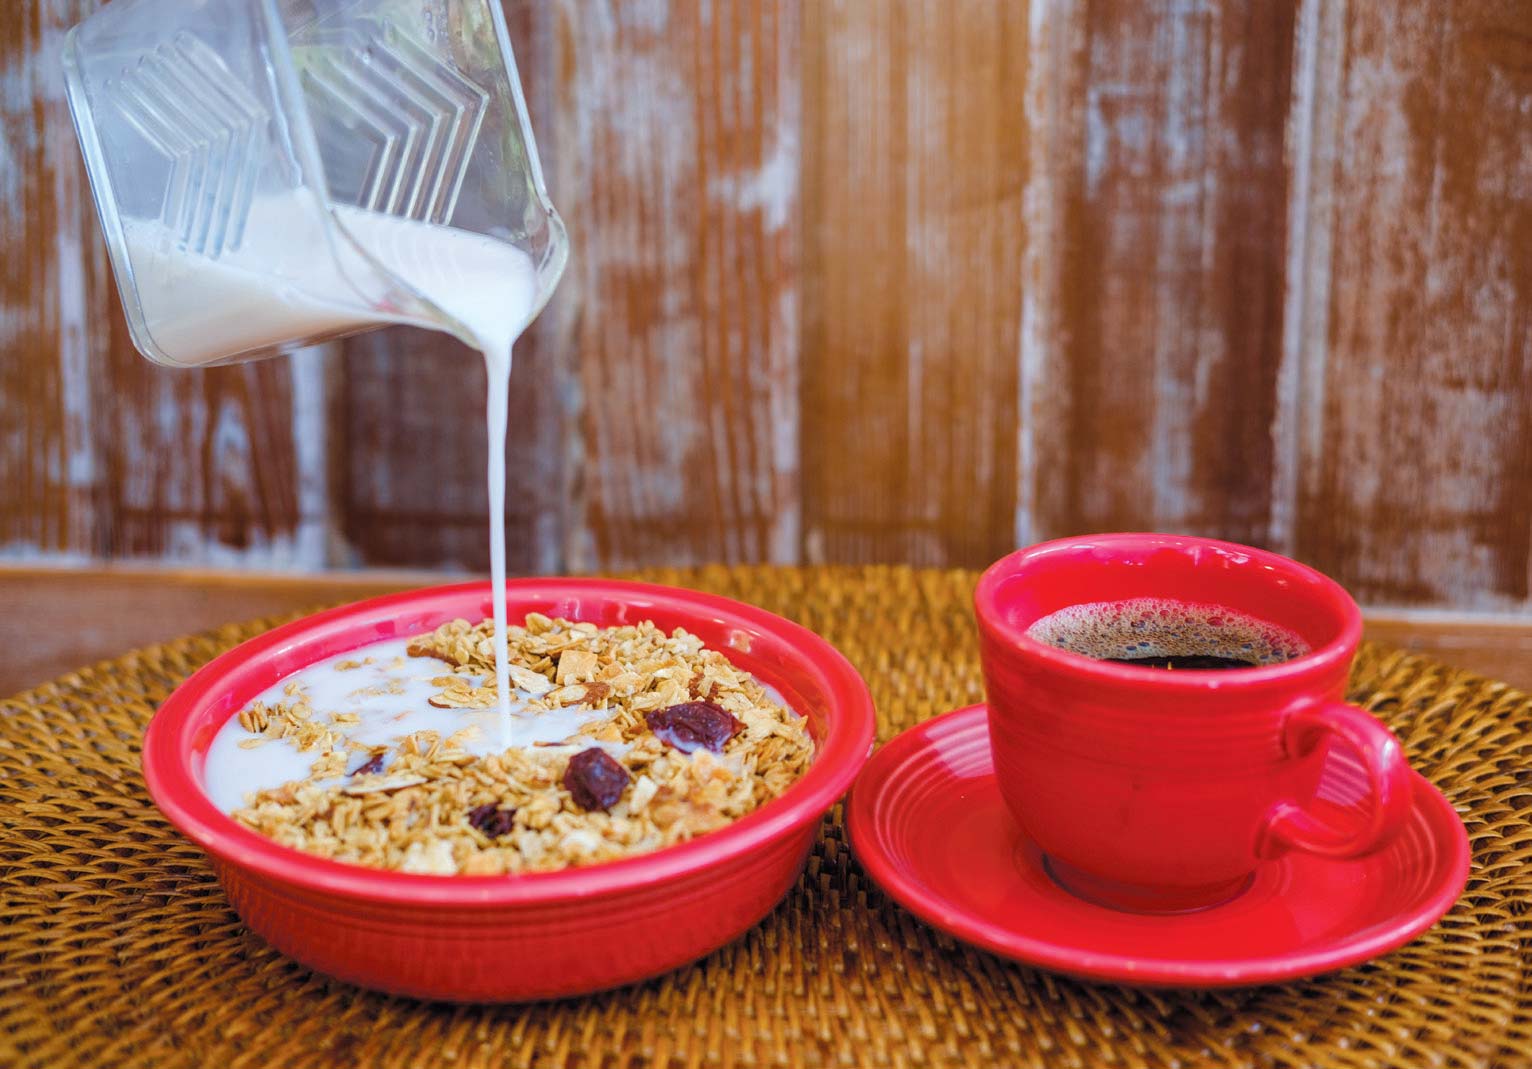 Kick Ash Products two primary products: Door County Love Artisan Granola with a cup of Kick Ash Coffee. Steven Brandt of Creative Compassion Photography